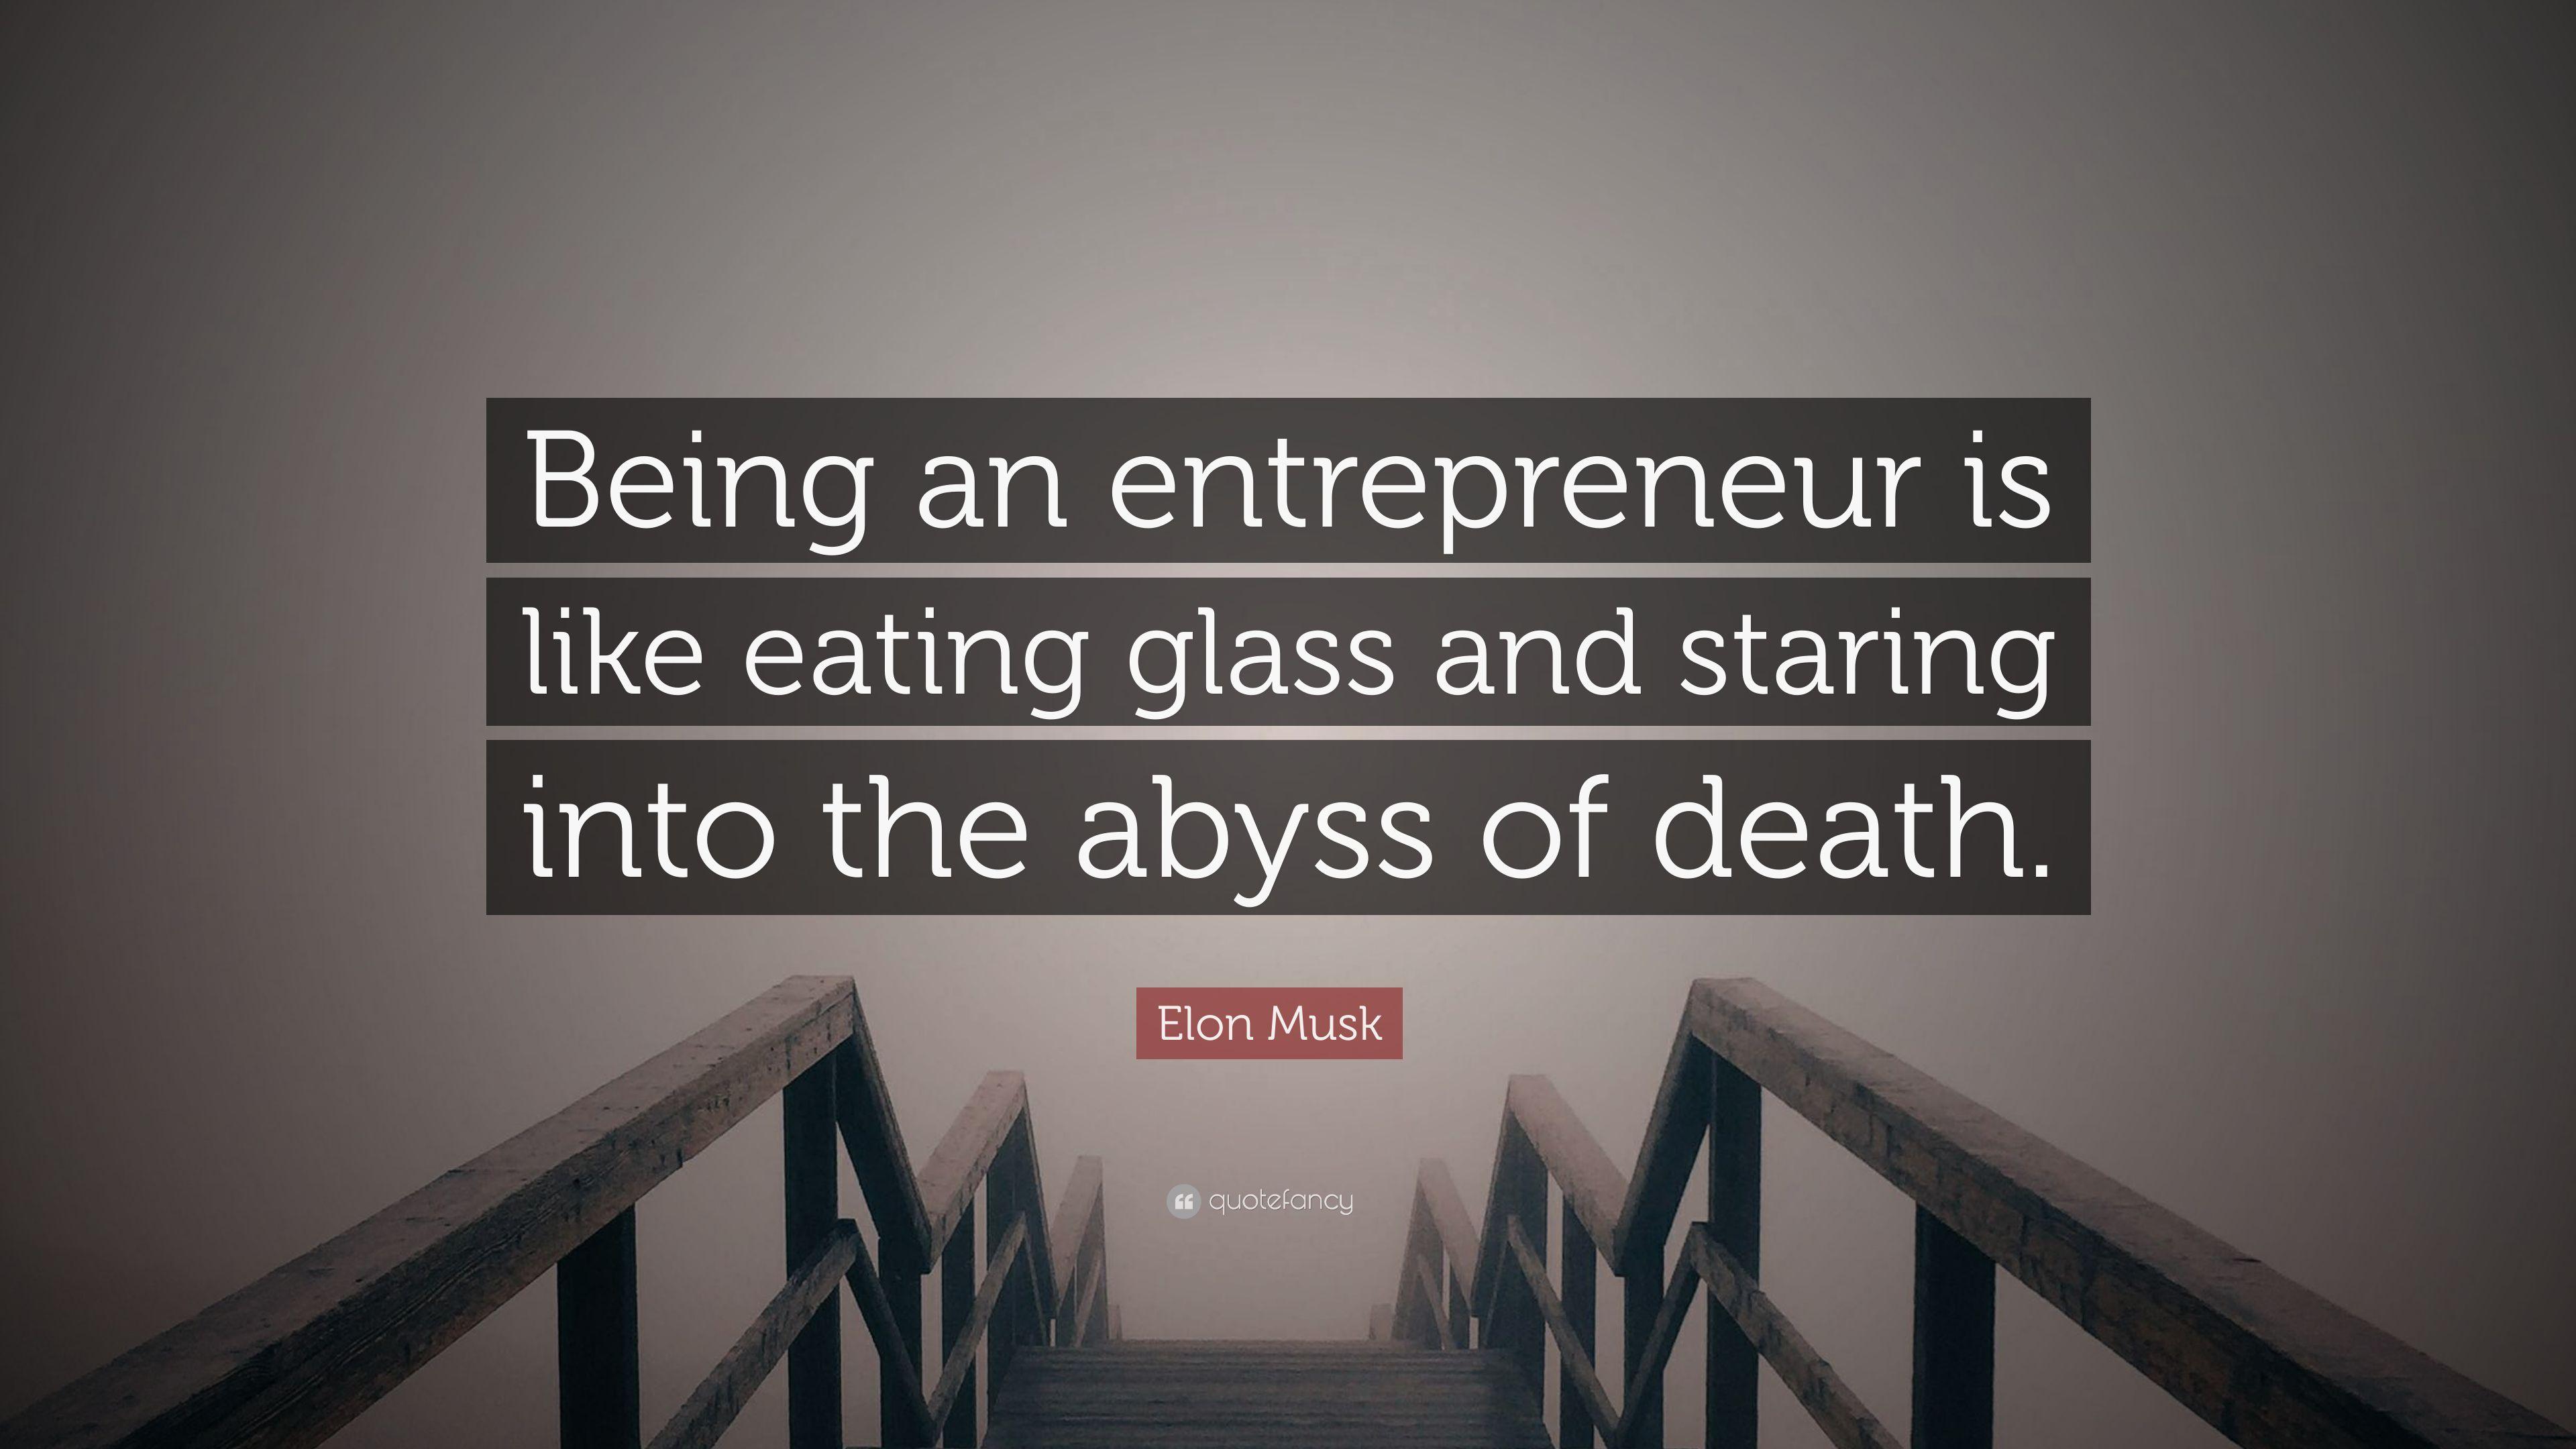 Elon Musk Quote: “Being an entrepreneur is like eating glass